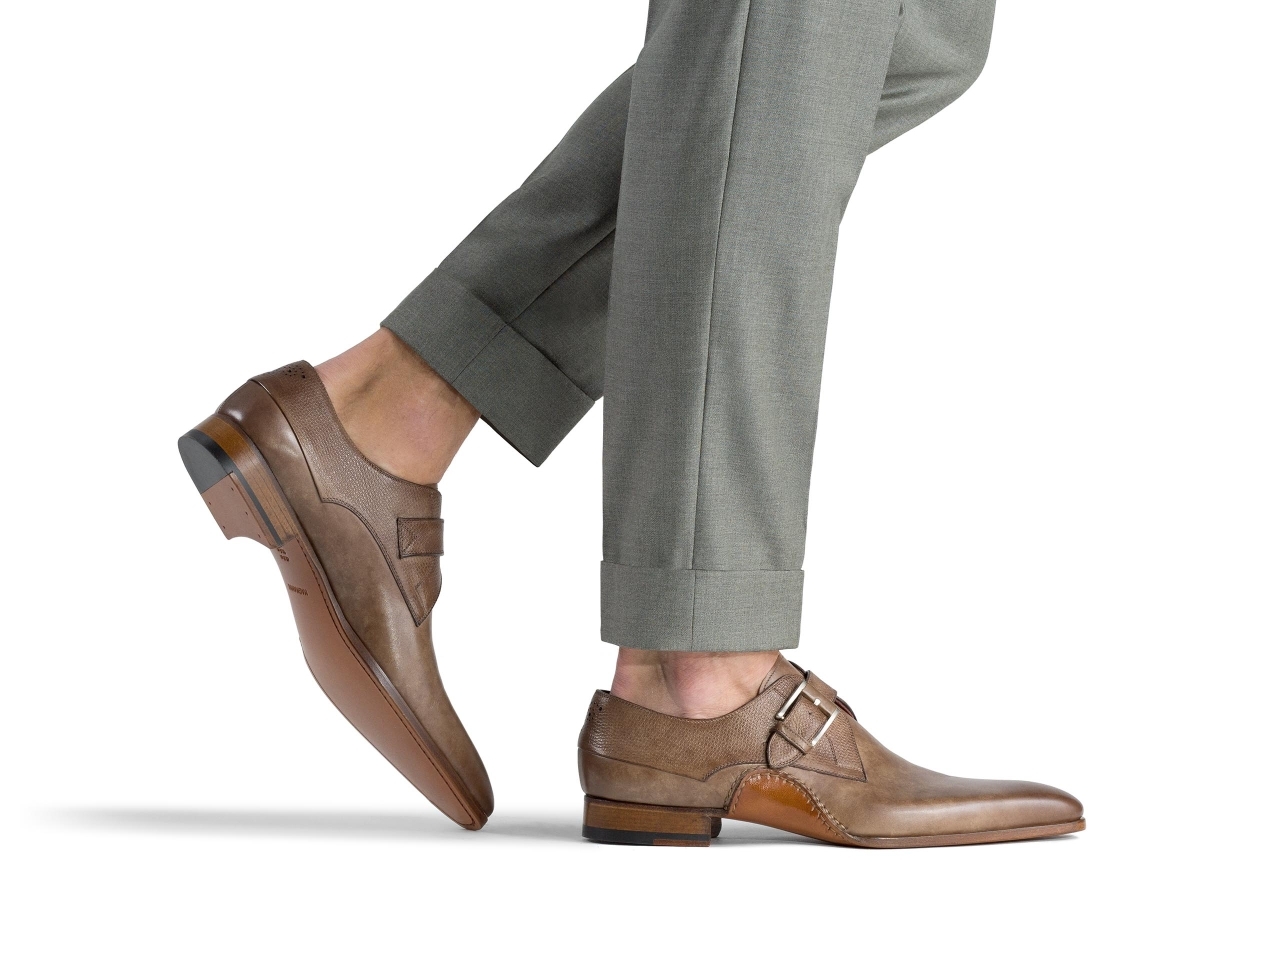 The Matteo Taupe pairs well with light grey pants